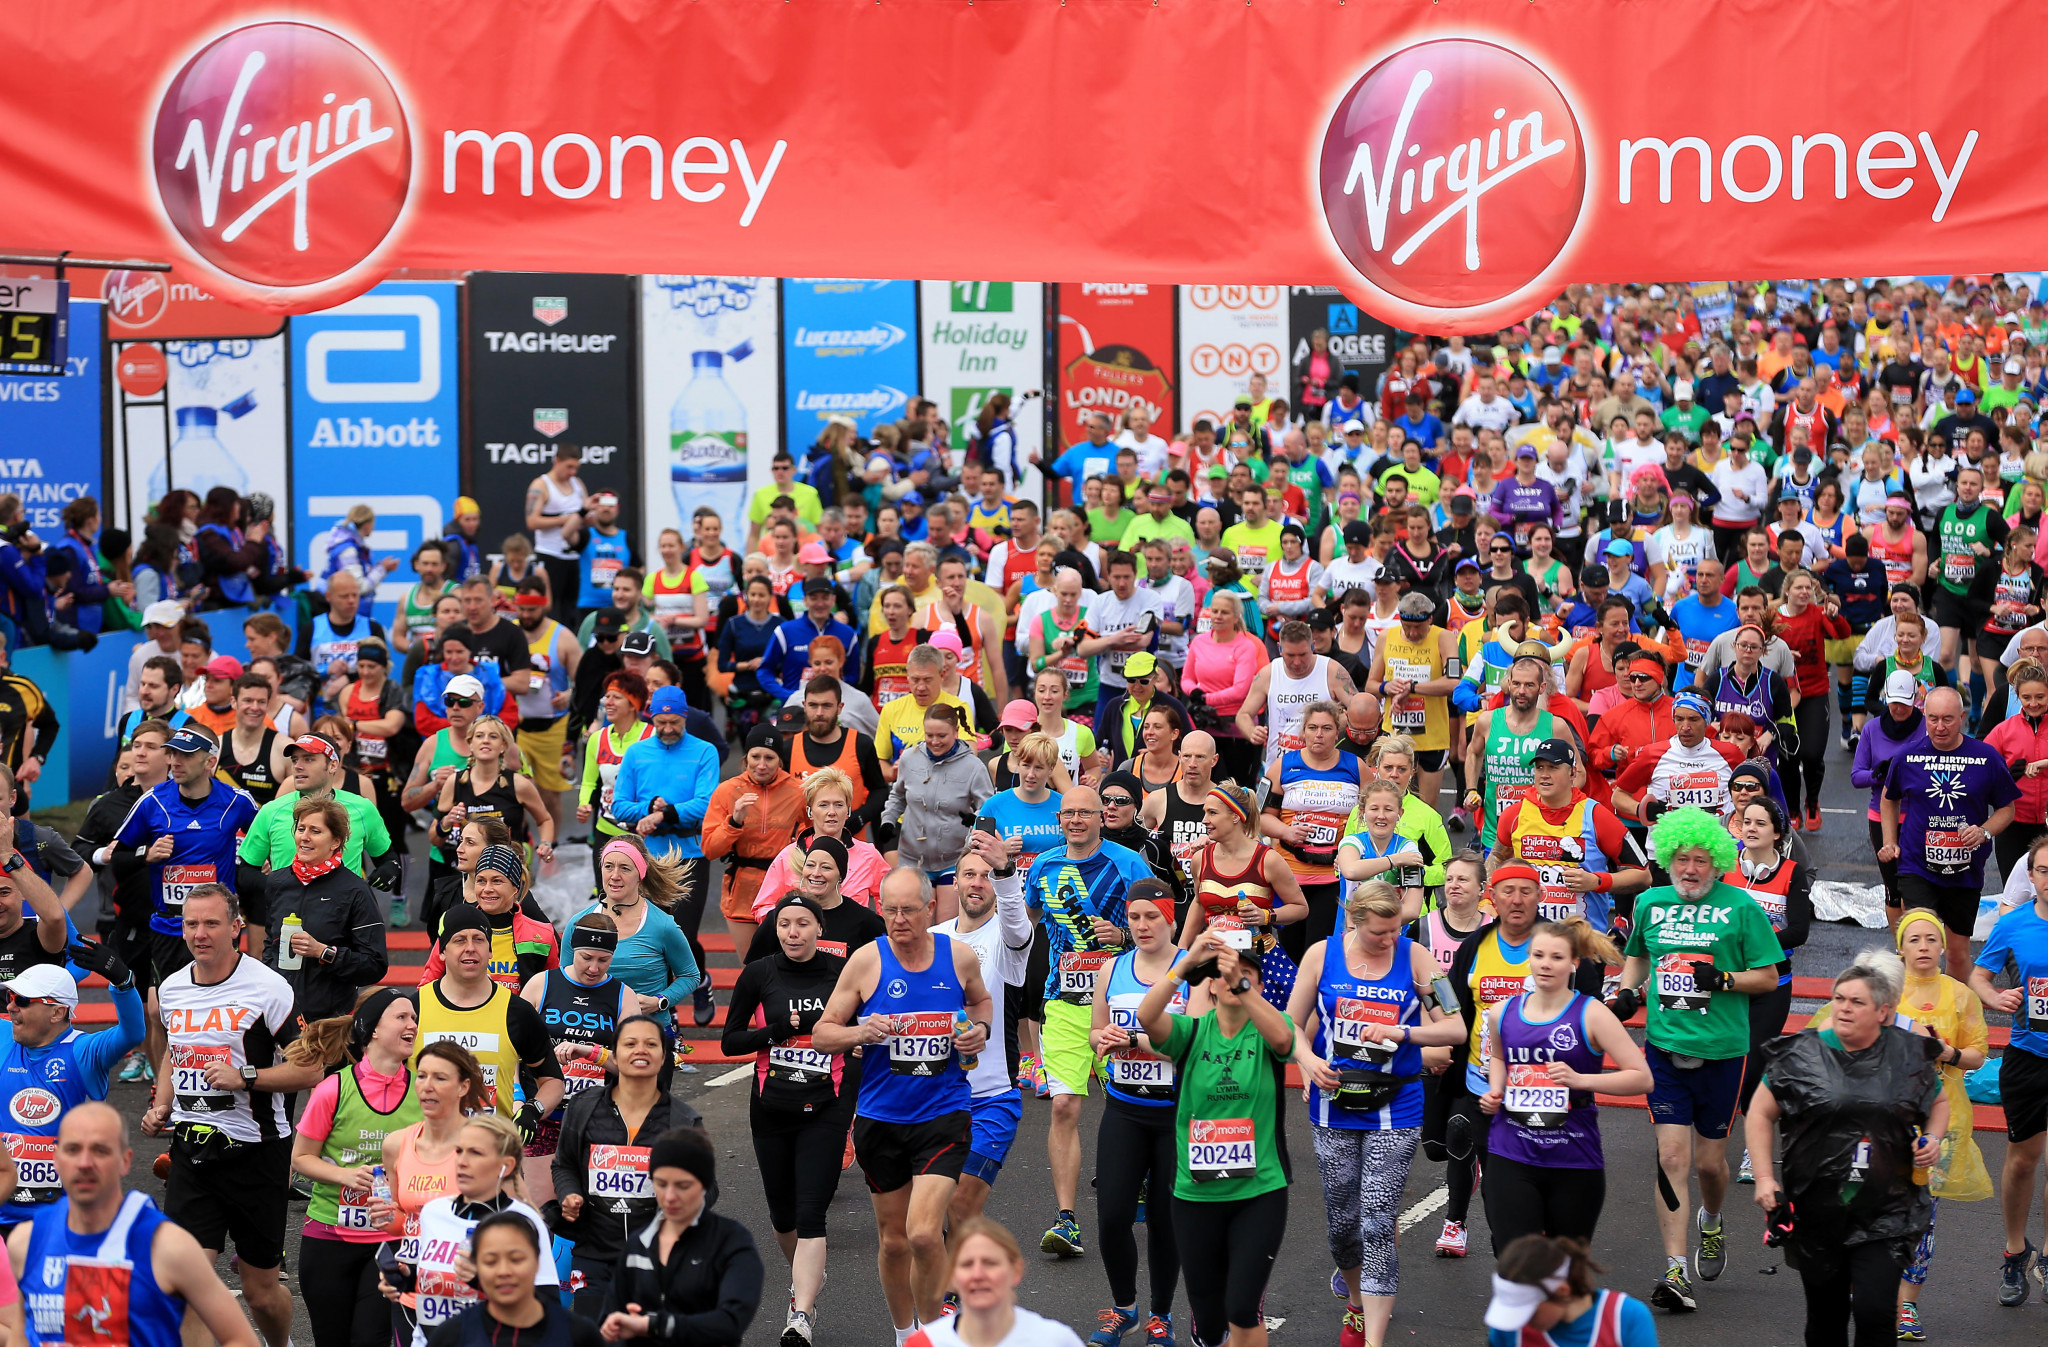 London Marathon organisers have announced they hope to have 50,000 in person runners at this year's event, scheduled for October ©Getty Images